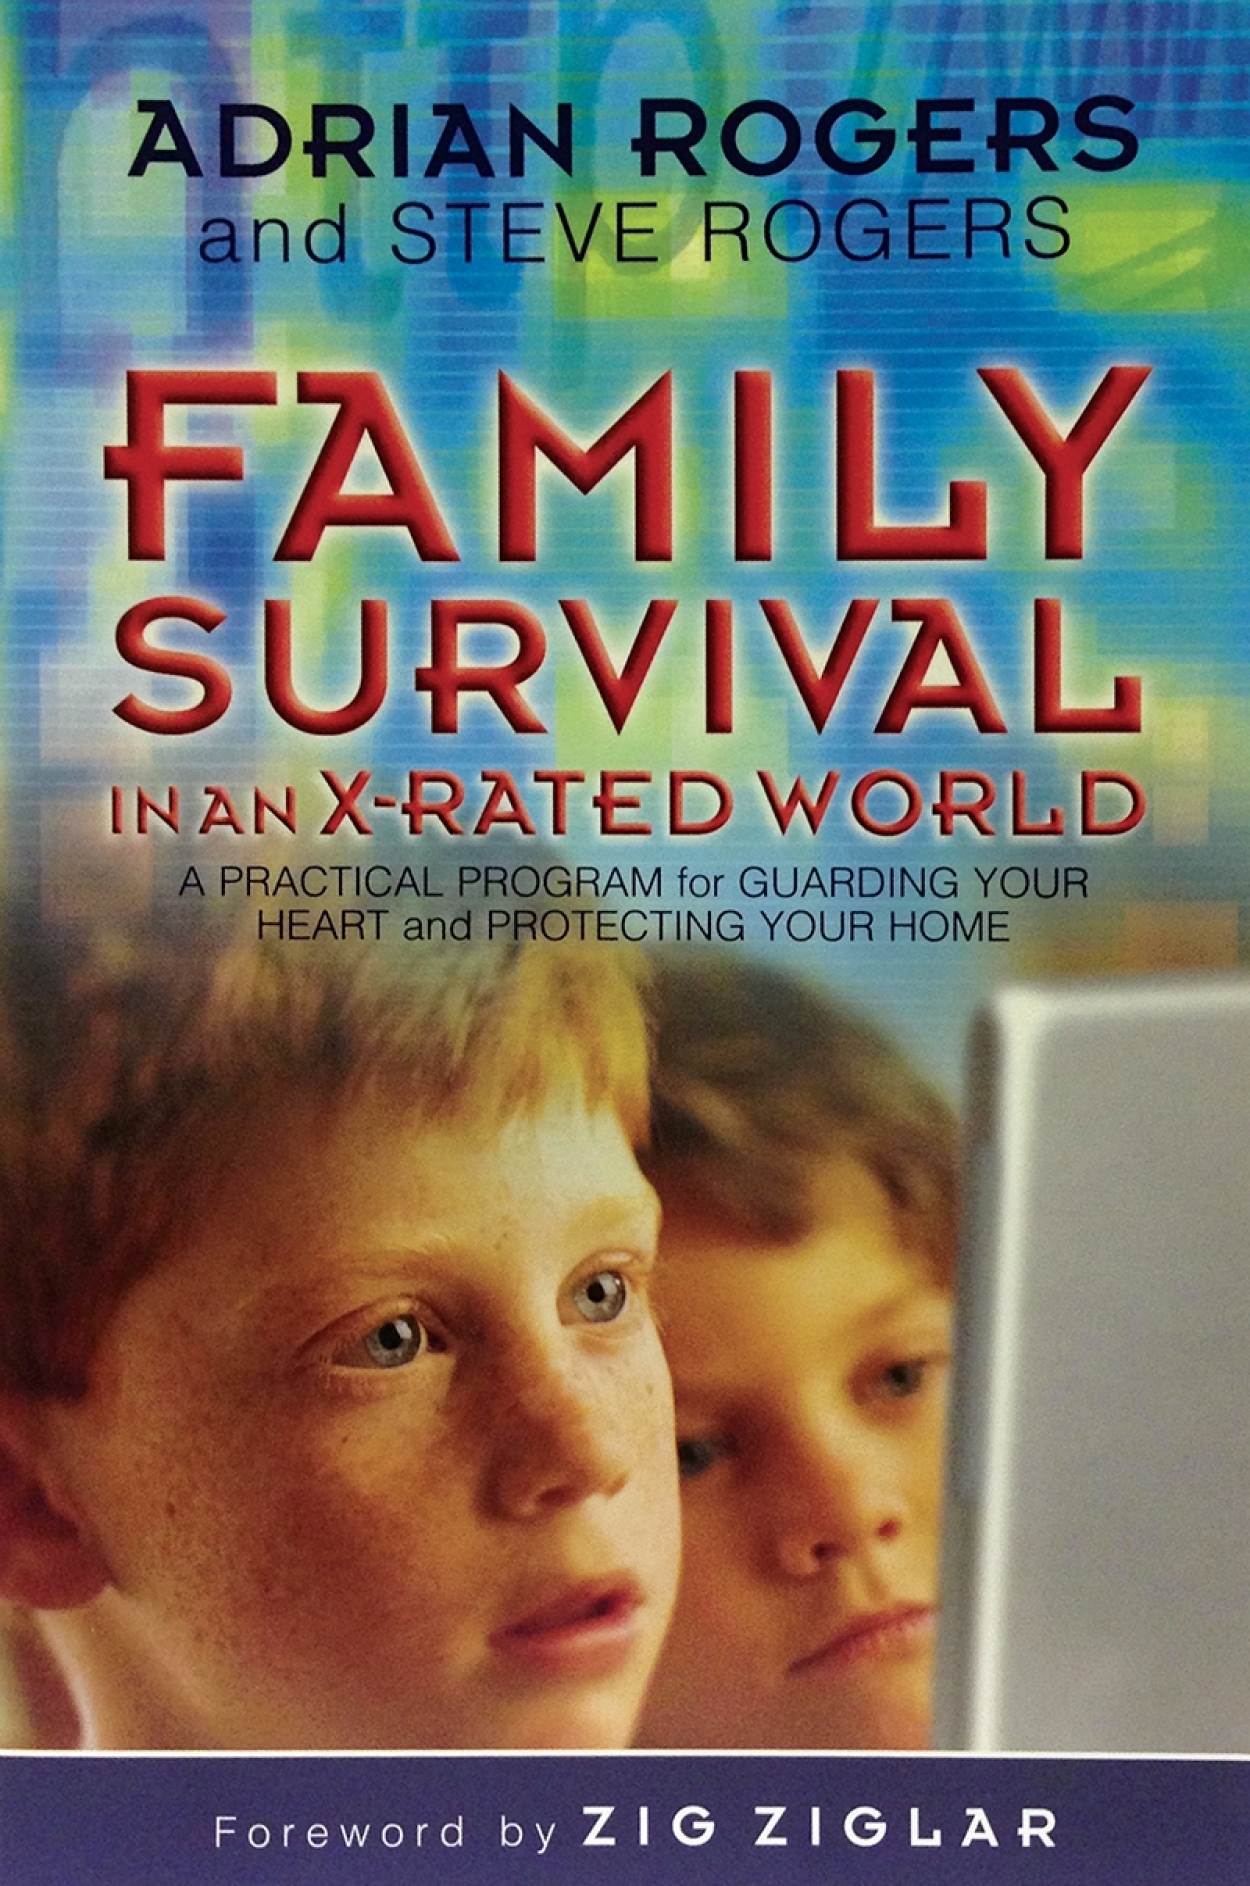 Family survival in an xrated world book b117